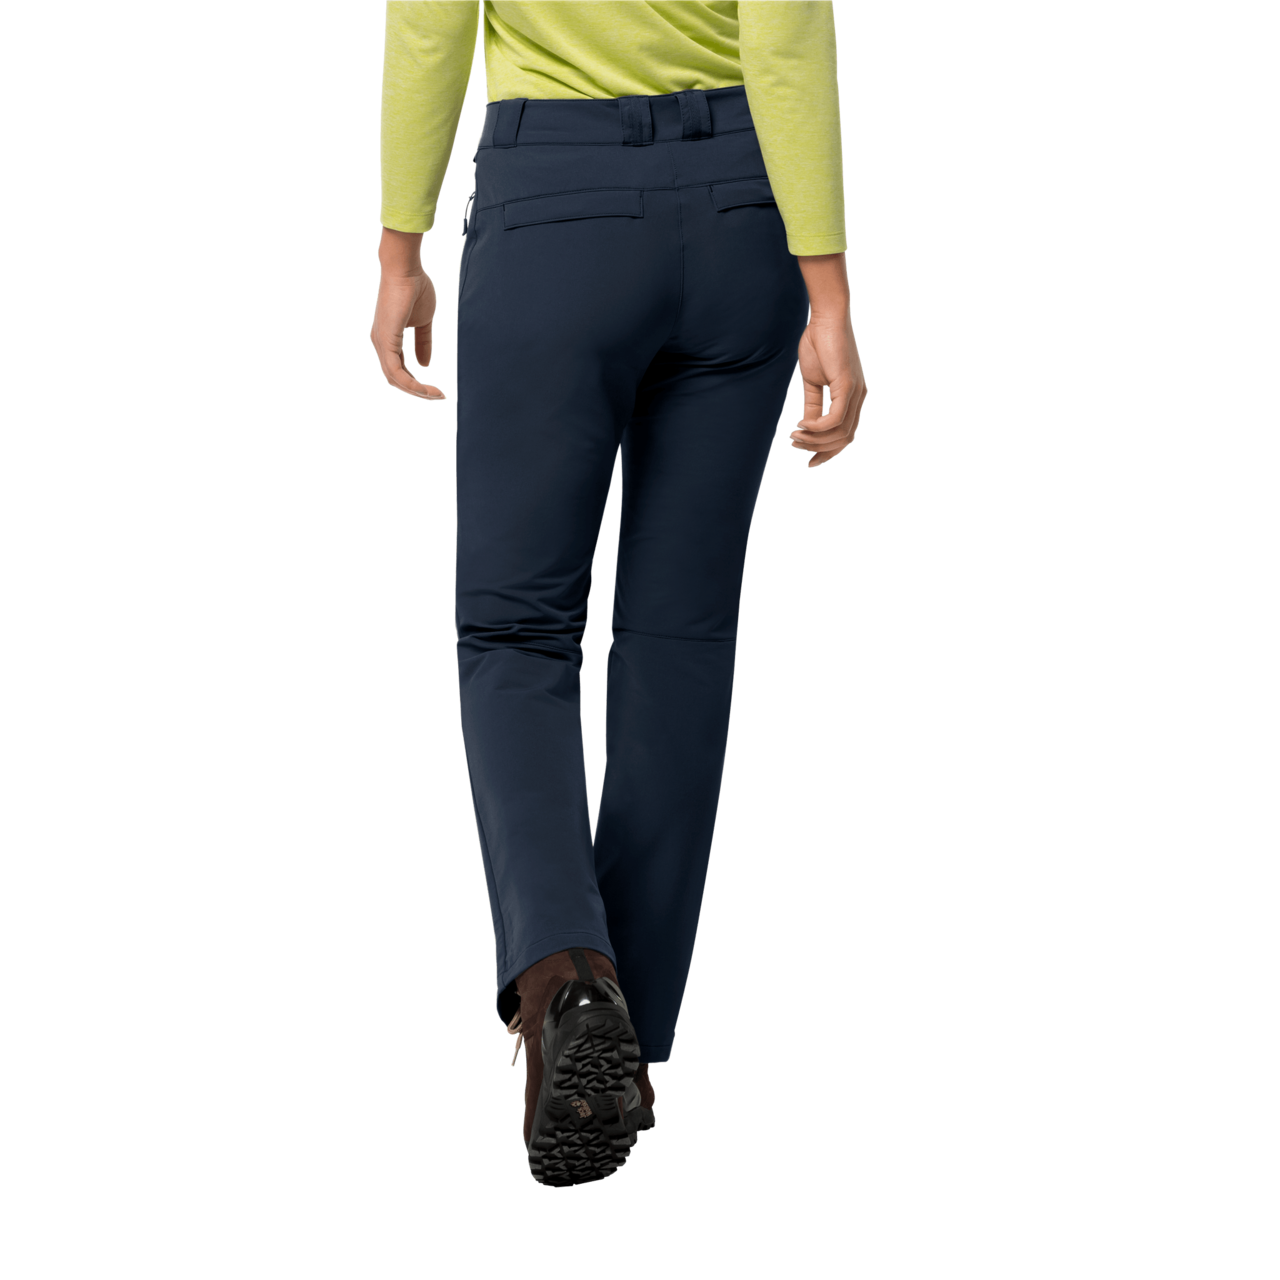 Buy Jack Wolfskin Activate Thermic Pants Women at Ubuy Palestine